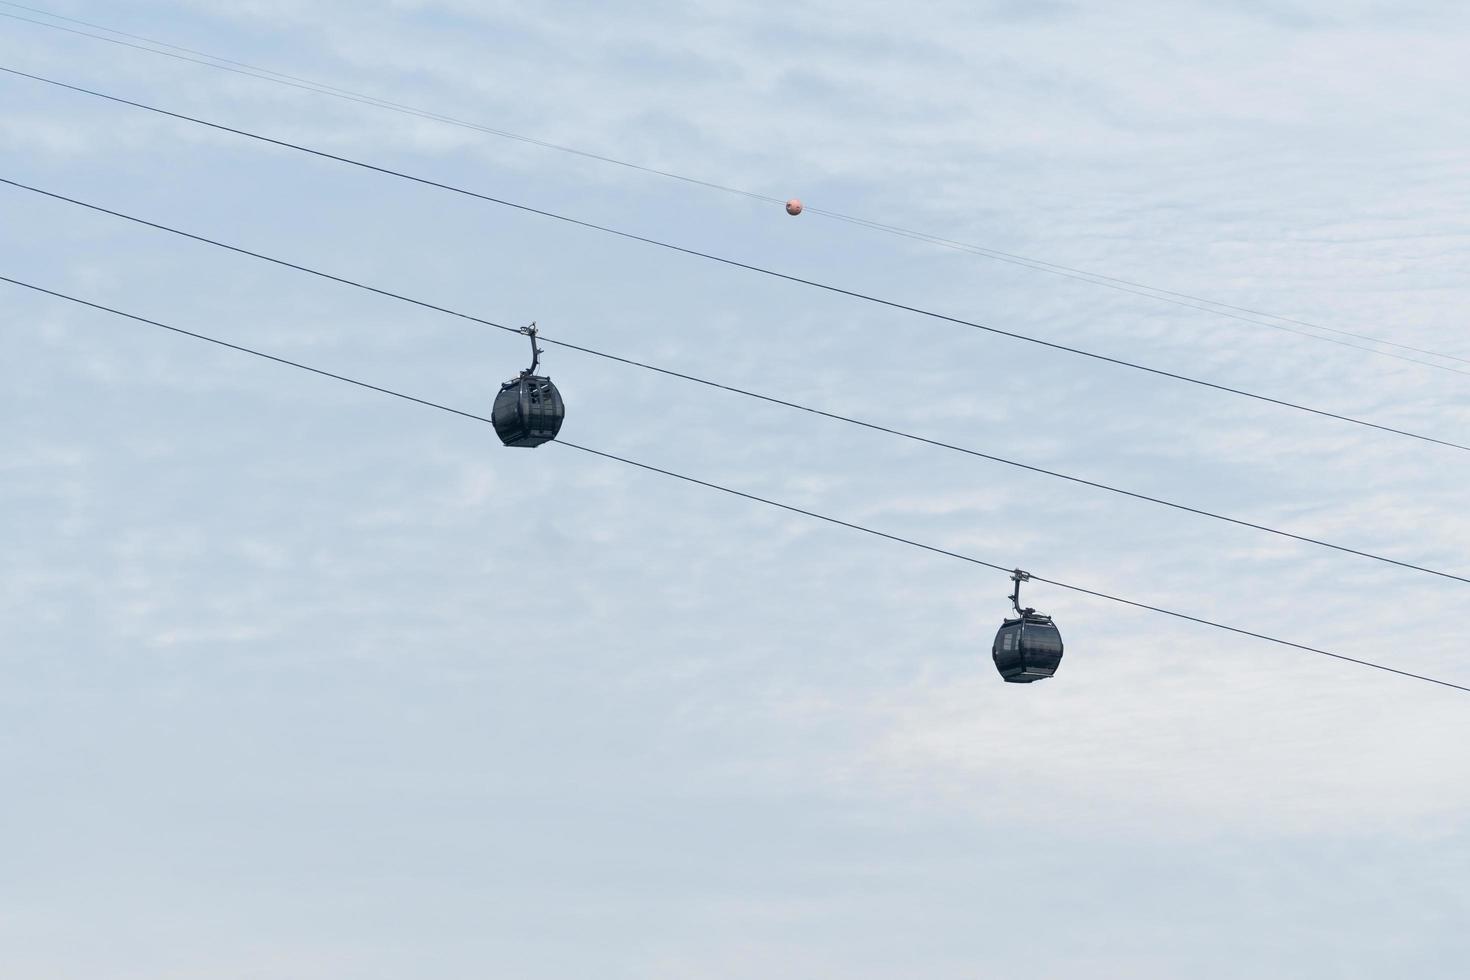 Cable cars in SIngapore photo